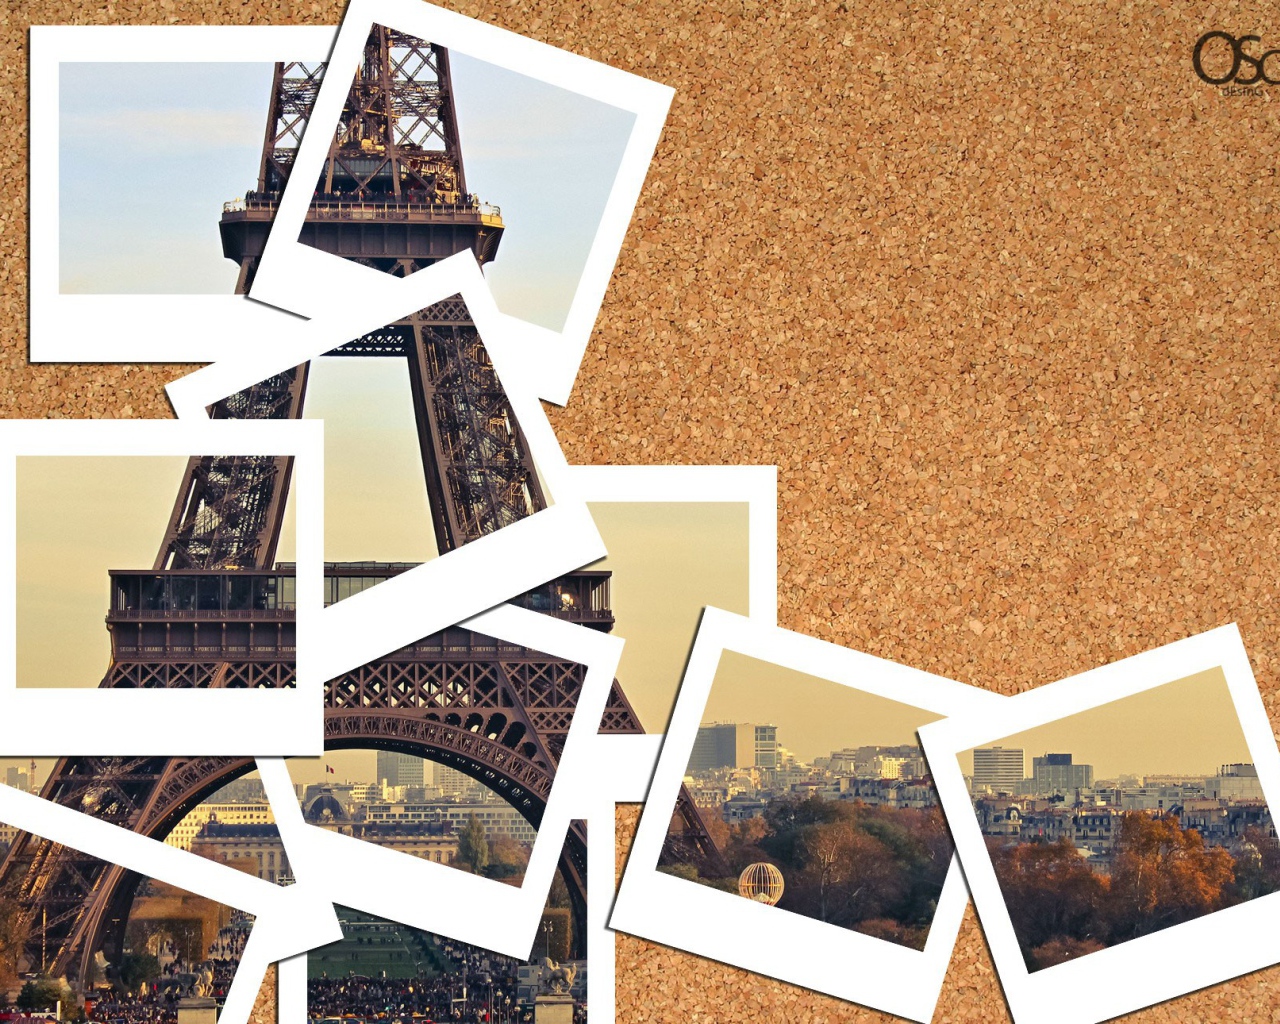 Image of the Eiffel Tower on multiple photos